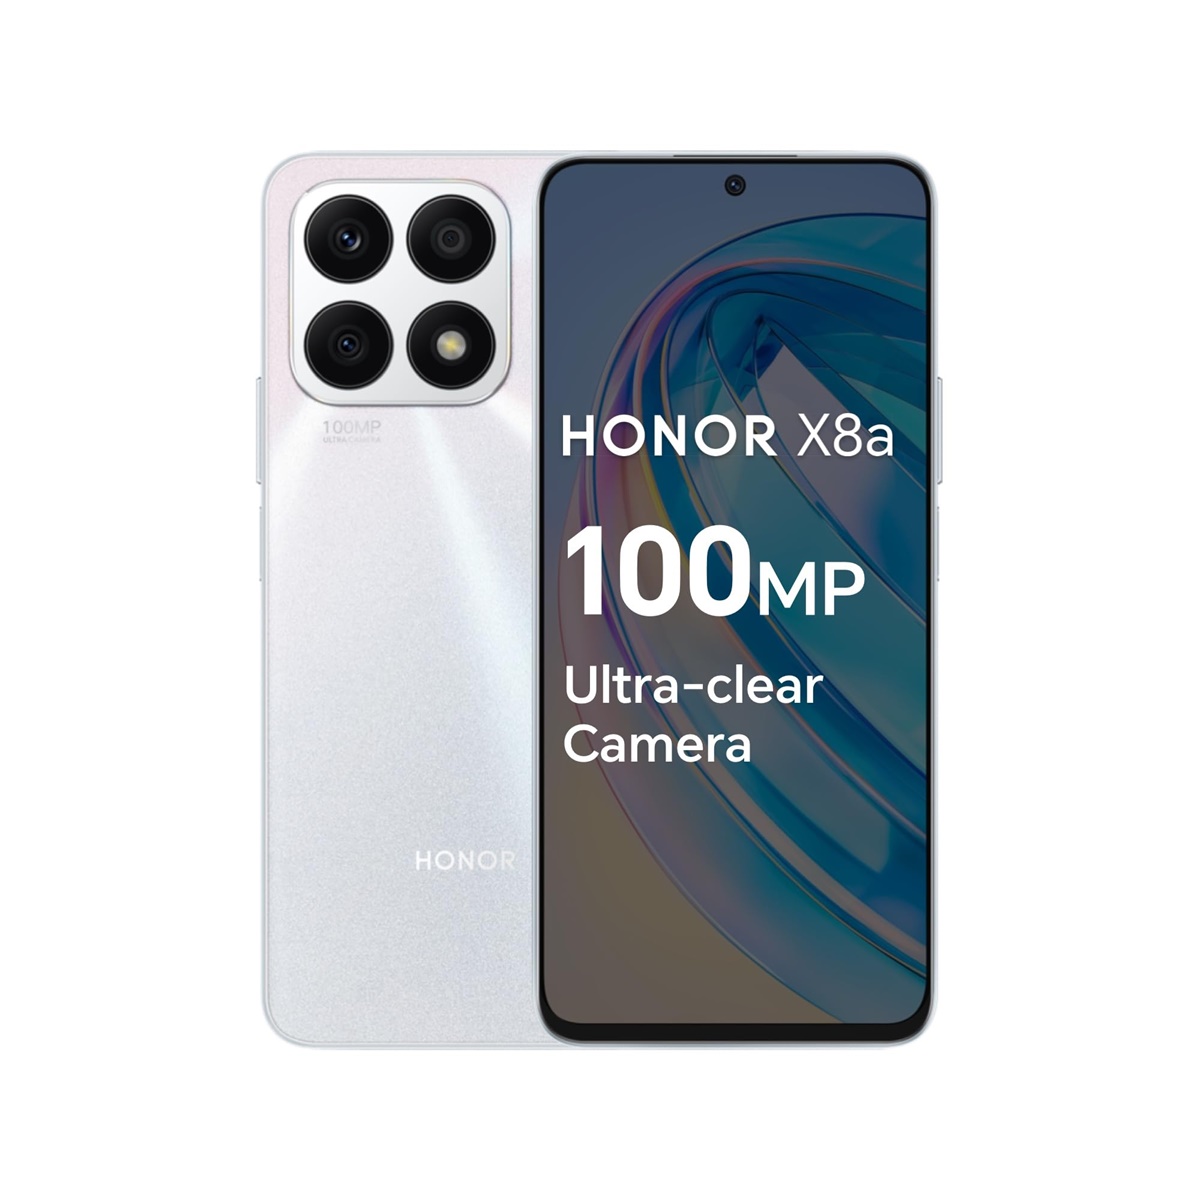 Honor X8a Released 2023, February 11, 179g, 7.5mm thickness, Android 12, Magic UI 6.1, 128GB storage, no card slot, 6.7"1080x2388 pixels, 100MP1080p, 4-12GB RAMHelio G88, 4500mAh23W